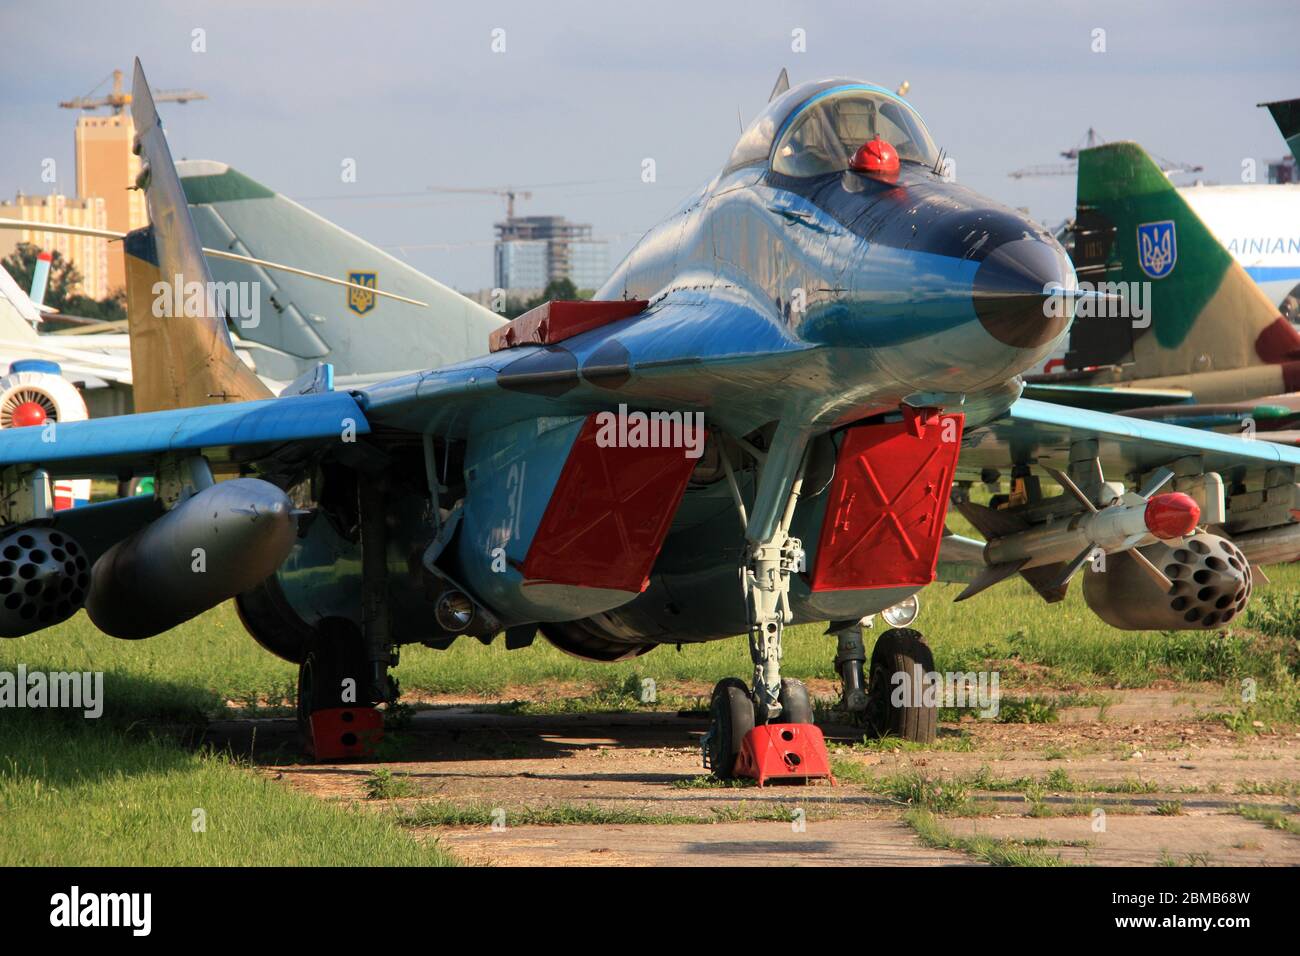 Front view of a Mikoyan MiG-29 'Fulcrum'  twin-engine air superiority jet fighter at the Zhulyany State Aviation Museum of Ukraine Stock Photo